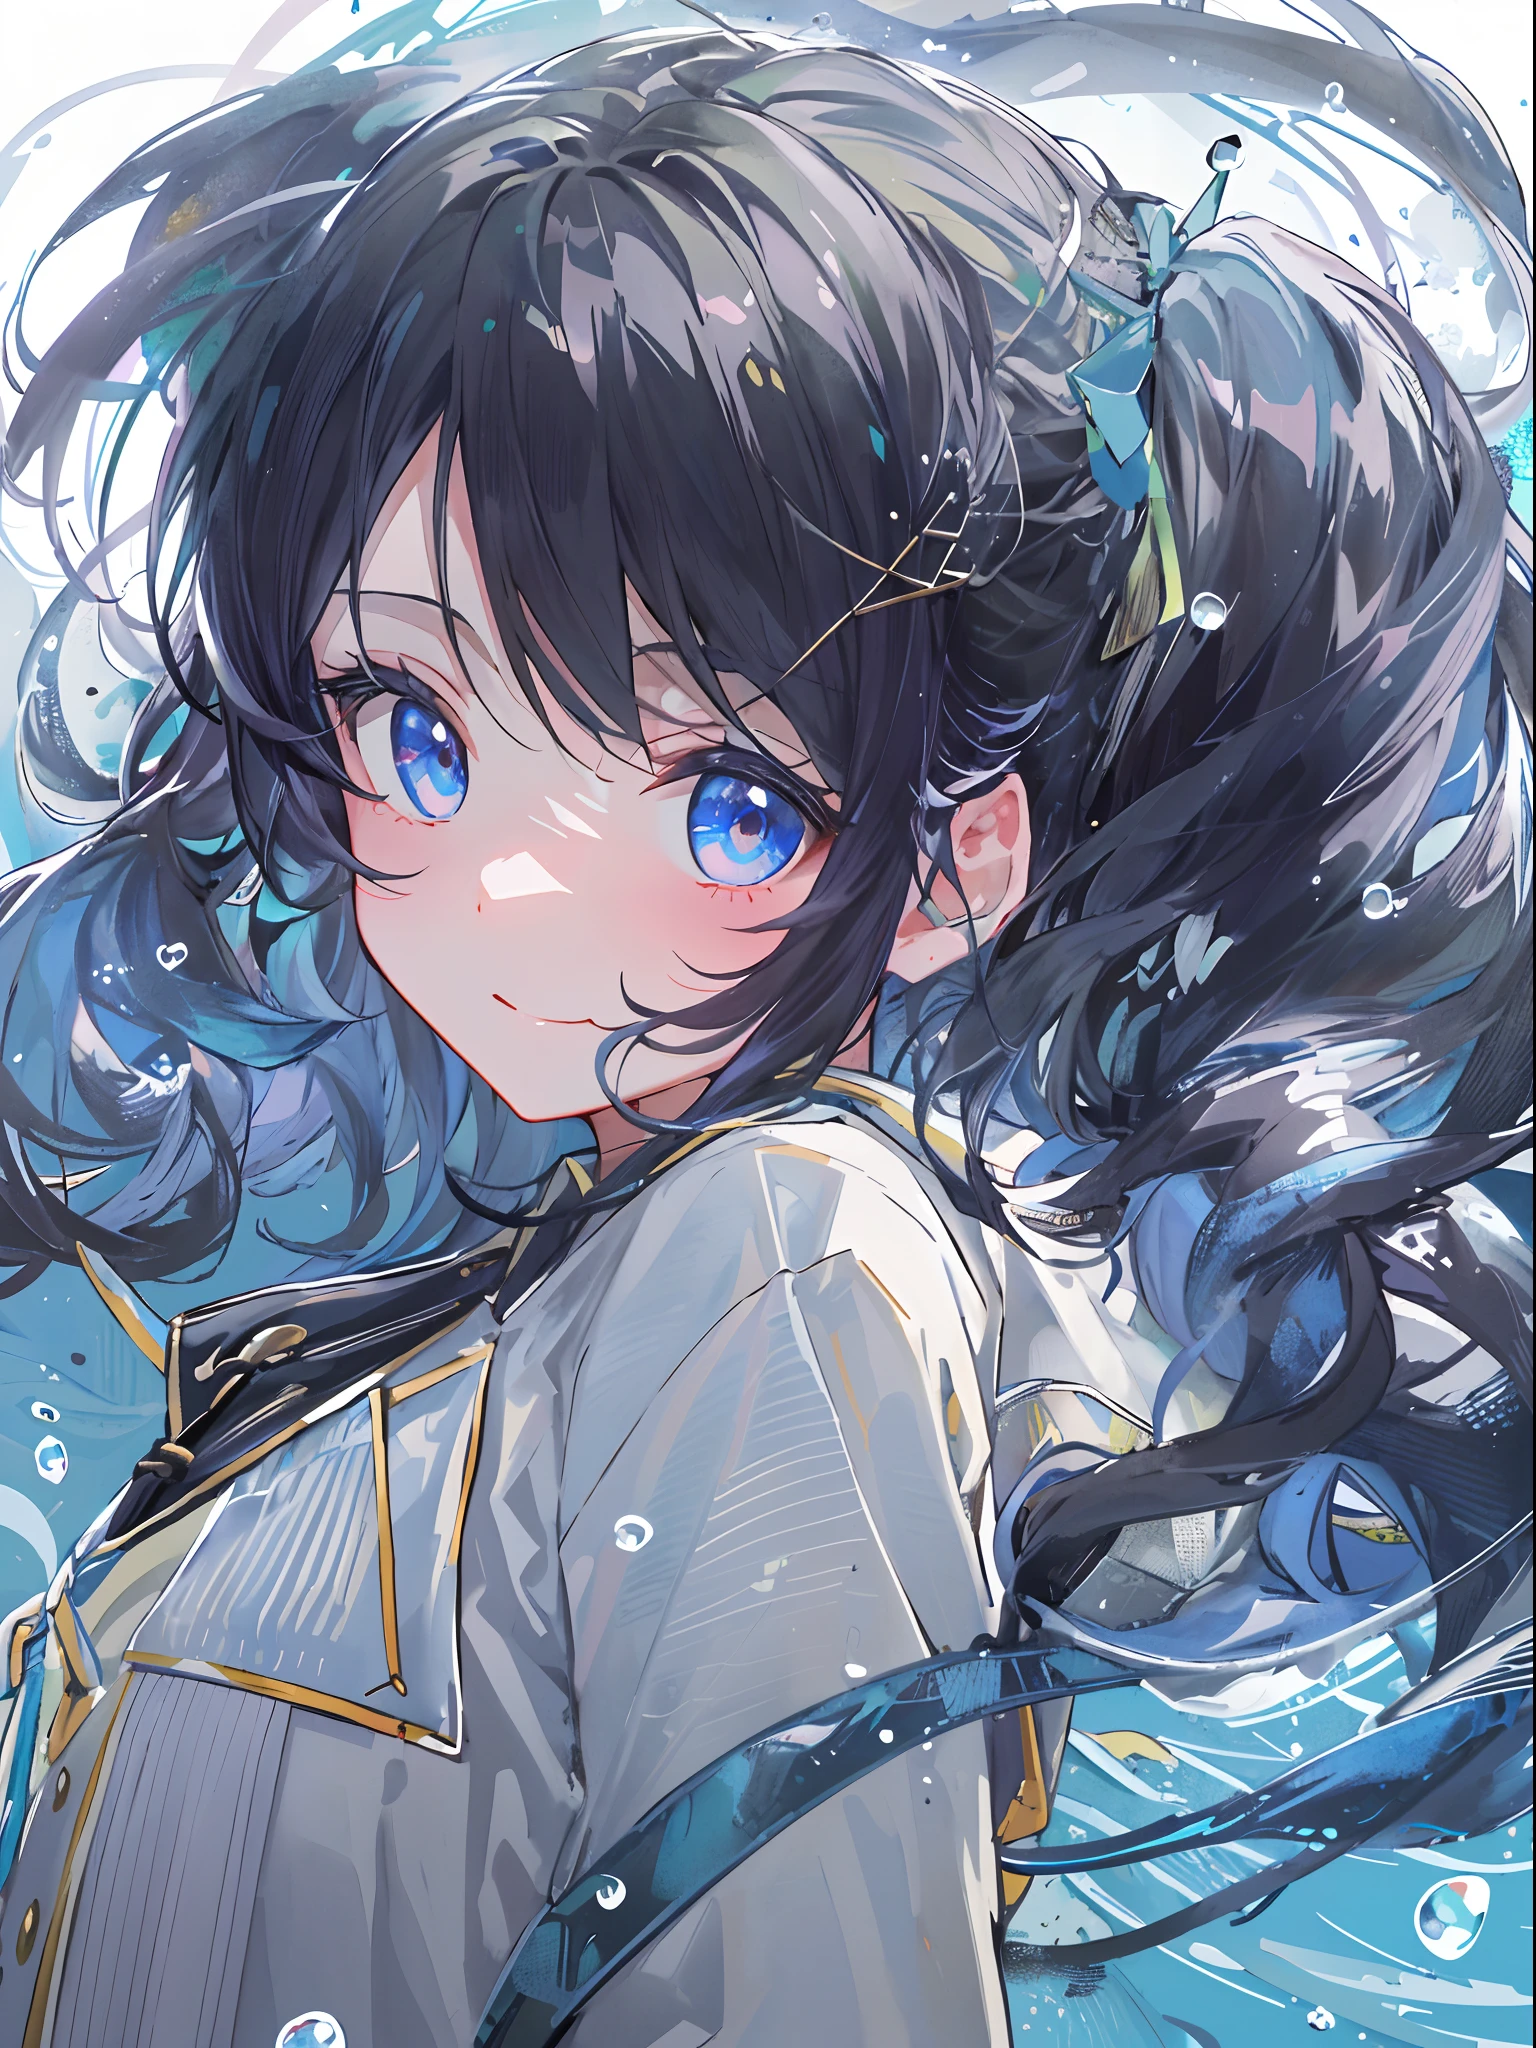 ((top-quality)), ((​masterpiece)), ((Ultra-detail)), (extremely delicate and beautiful), girl with, solo, cold attitude,((Black jacket)),She is very(relax)with  the(Settled down)Looks,A darK-haired, depth of fields,evil smile,Bubble, under the water, Air bubble,bright light blue eyes,Inner color with black hair and light blue tips,Cold background,Bob Hair - Linear Art, shortpants、knee high socks、White uniform like 、Light blue ribbon ties、Clothes are sheer、Hands in pockets、Ponytail hair、